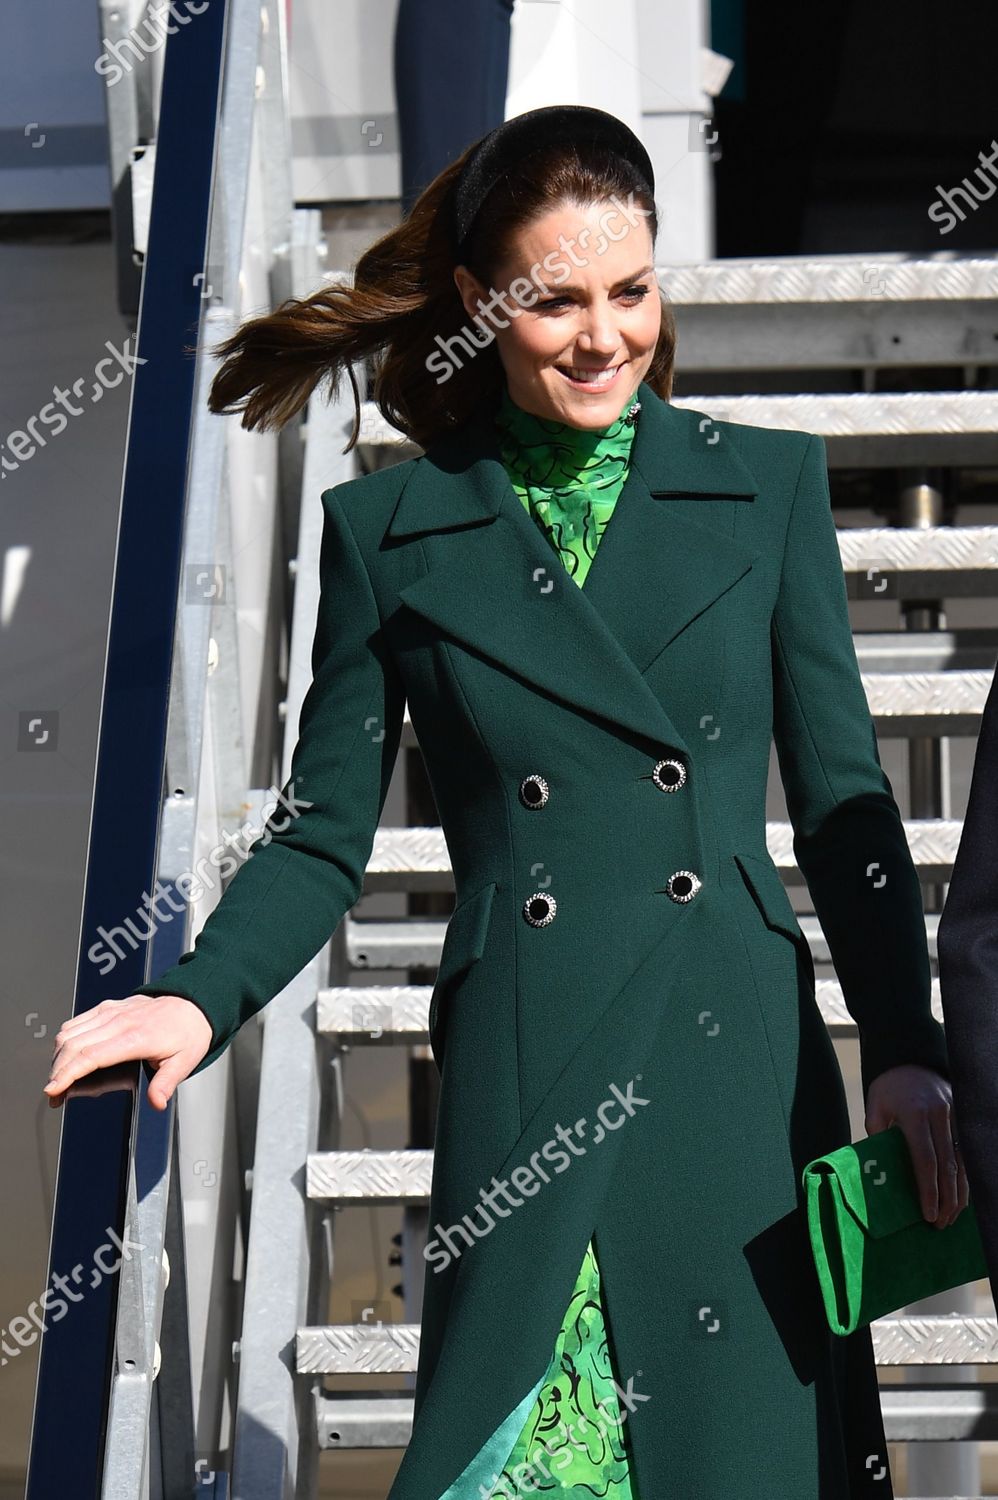 prince-william-and-catherine-duchess-of-cambridge-visit-to-ireland-shutterstock-editorial-10573047l.jpg